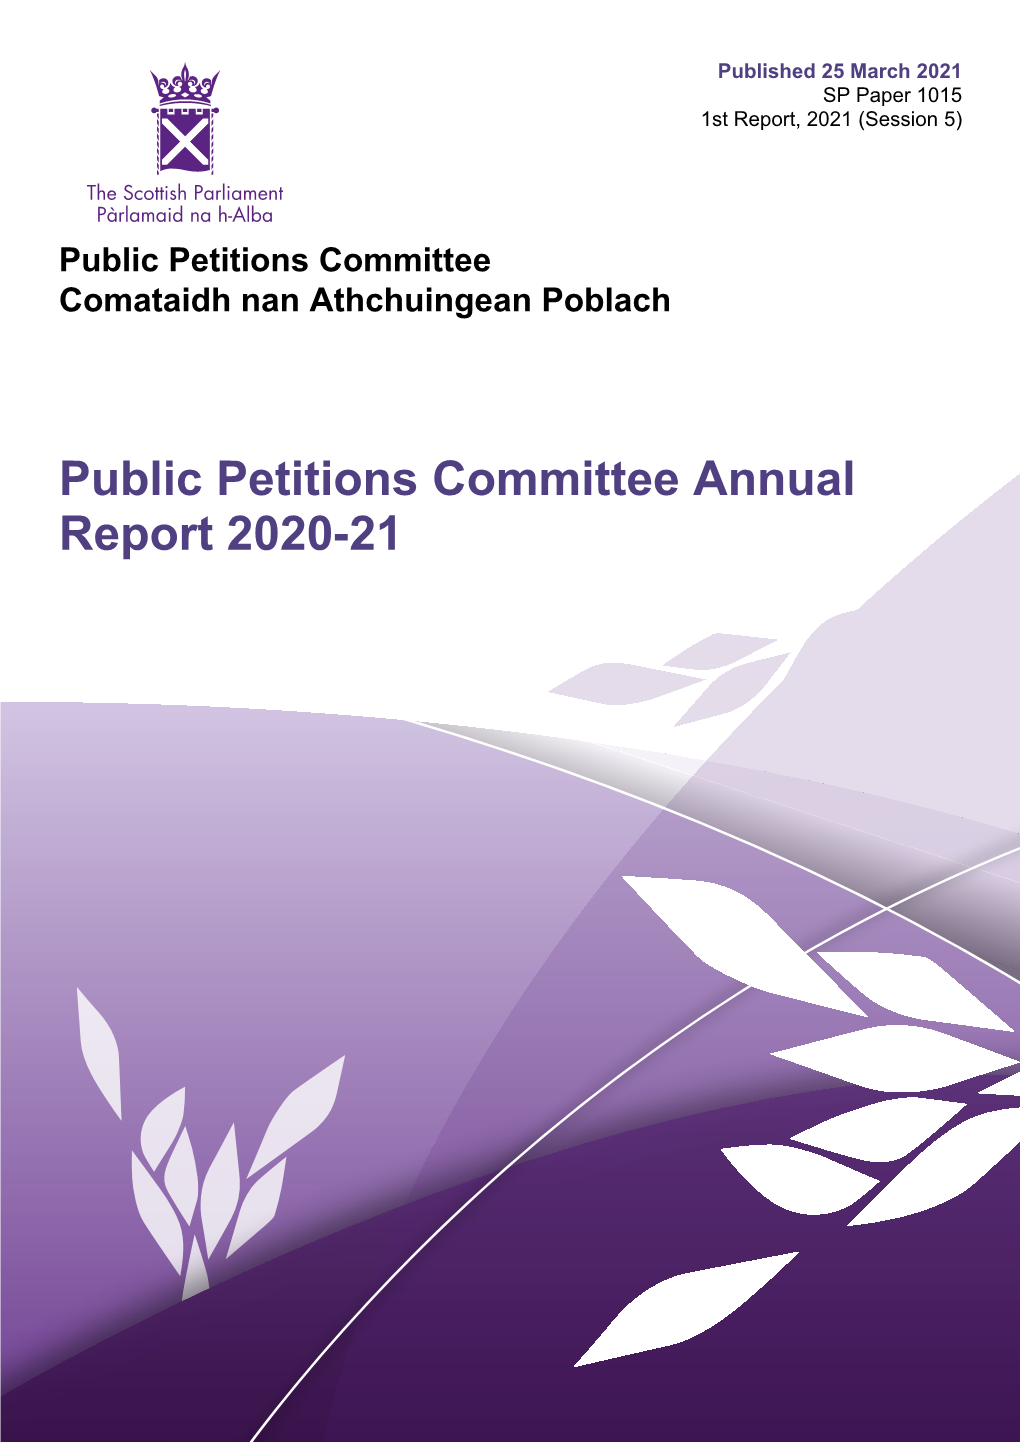 Public Petitions Committee Annual Report 2020-21 Published in Scotland by the Scottish Parliamentary Corporate Body